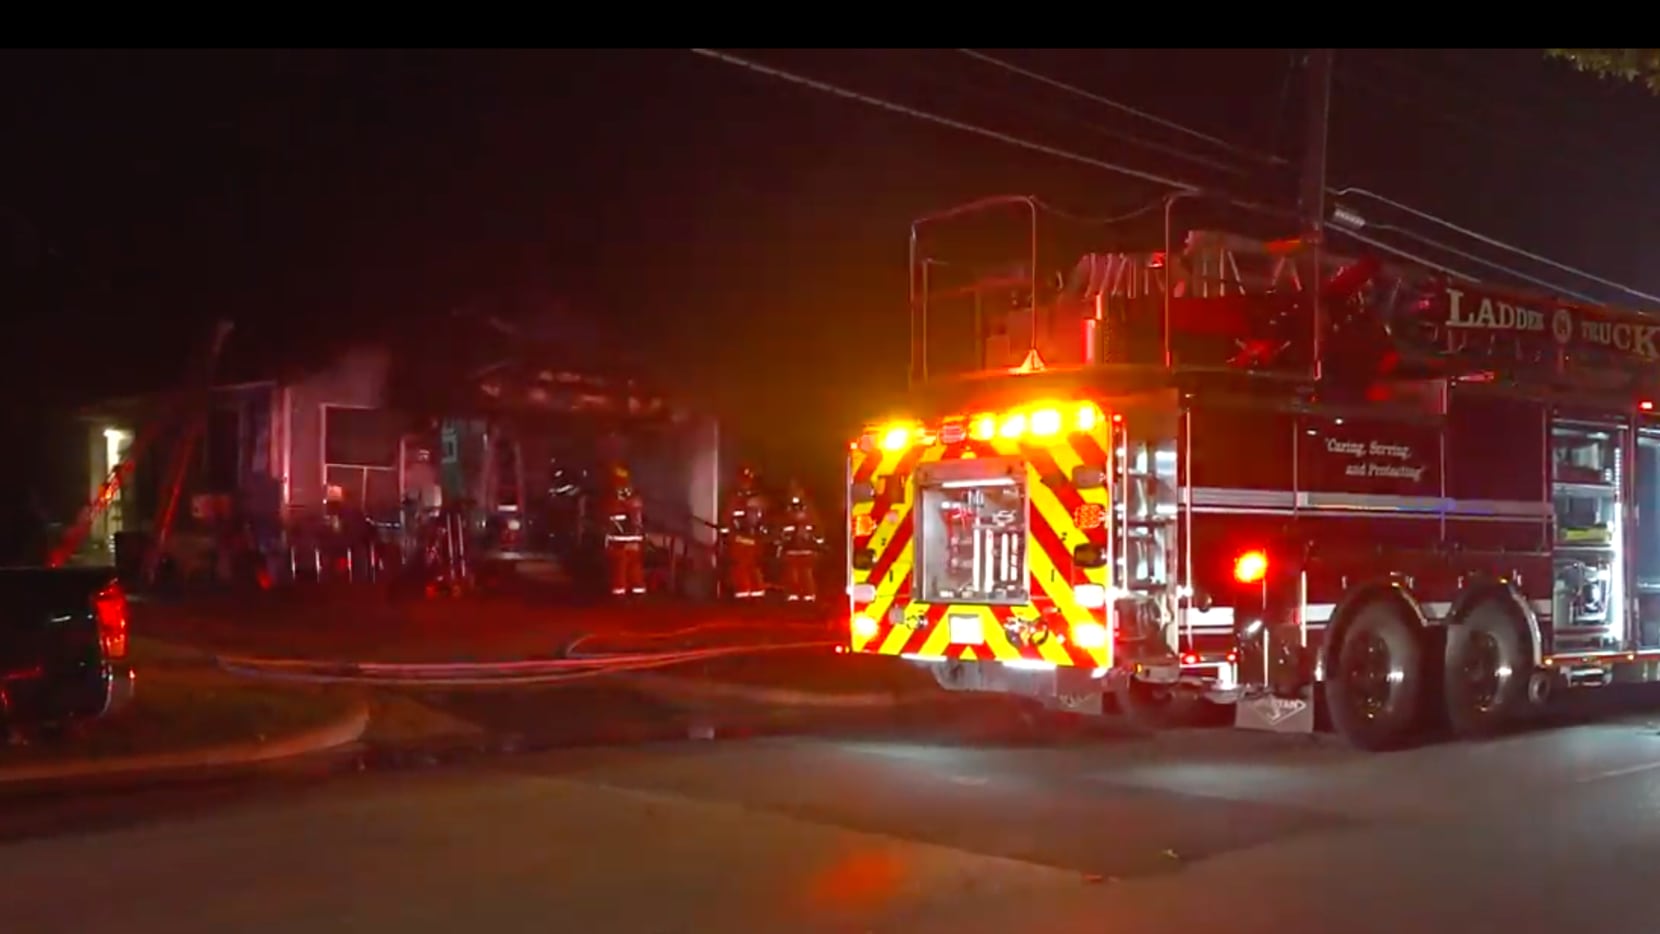 Firefighters were able to extinguish the South Dallas blaze in a little under an hour.